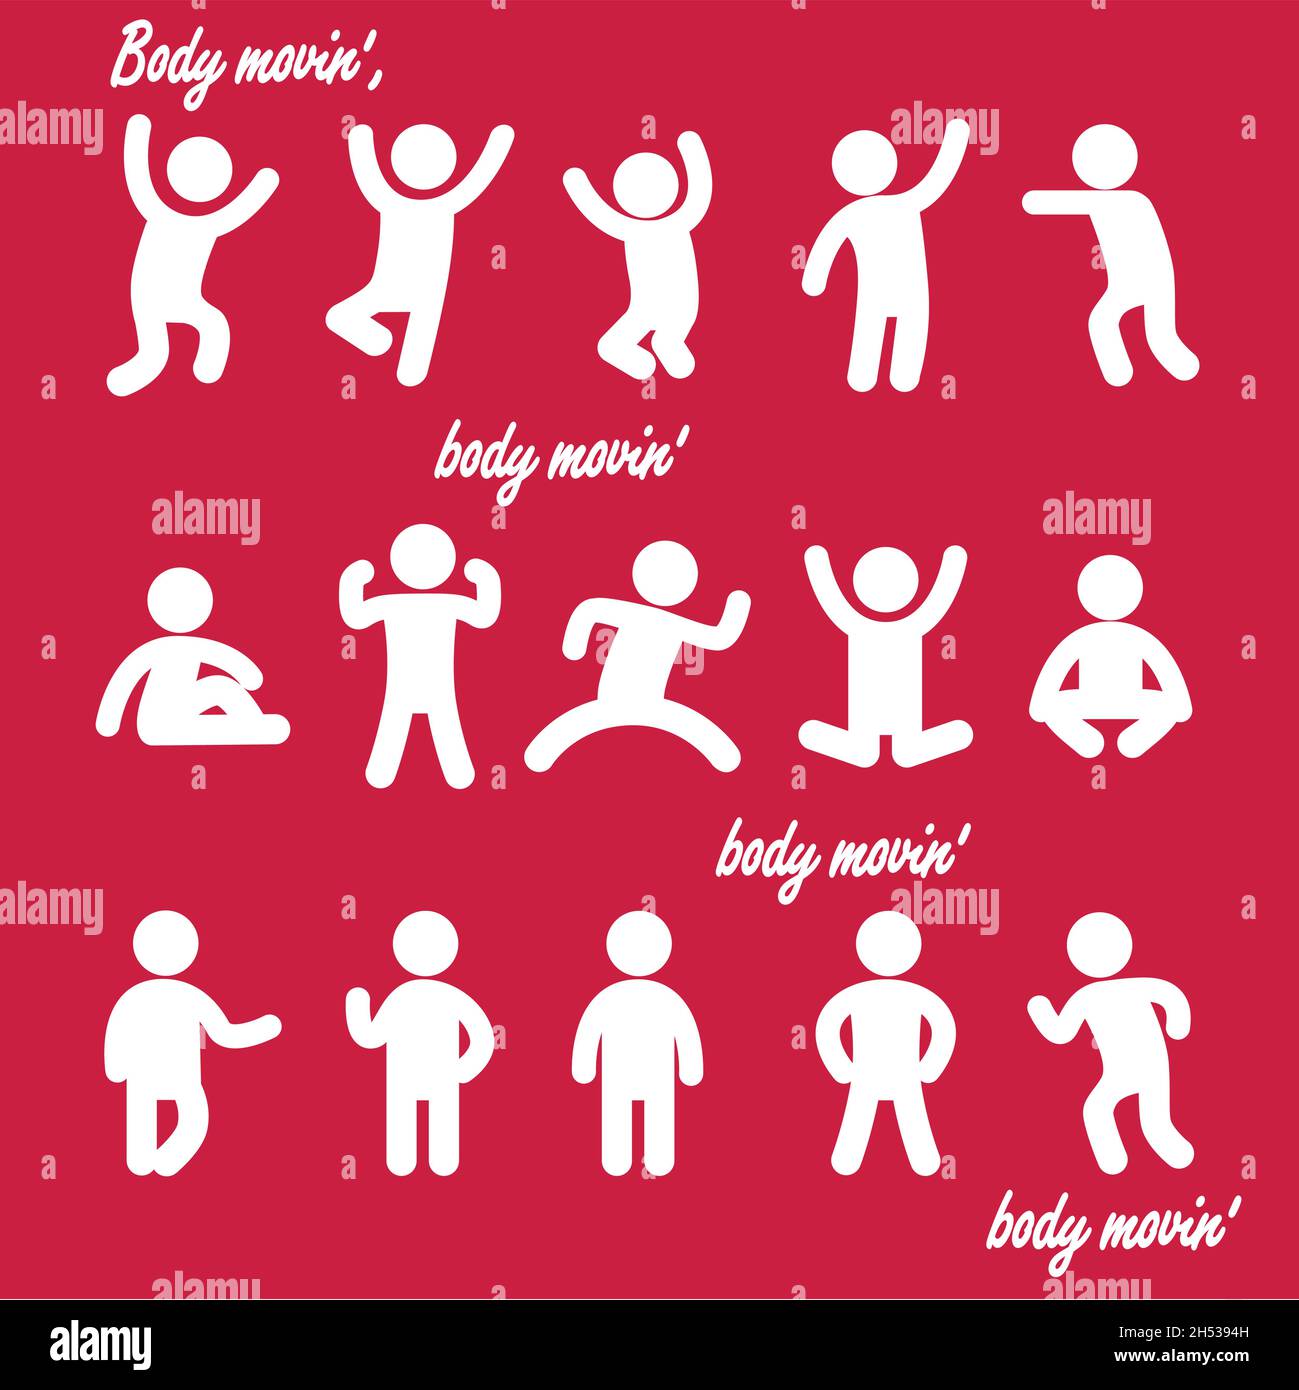 solid human bathroom icon stick figures low height with various poses body movin' Stock Vector